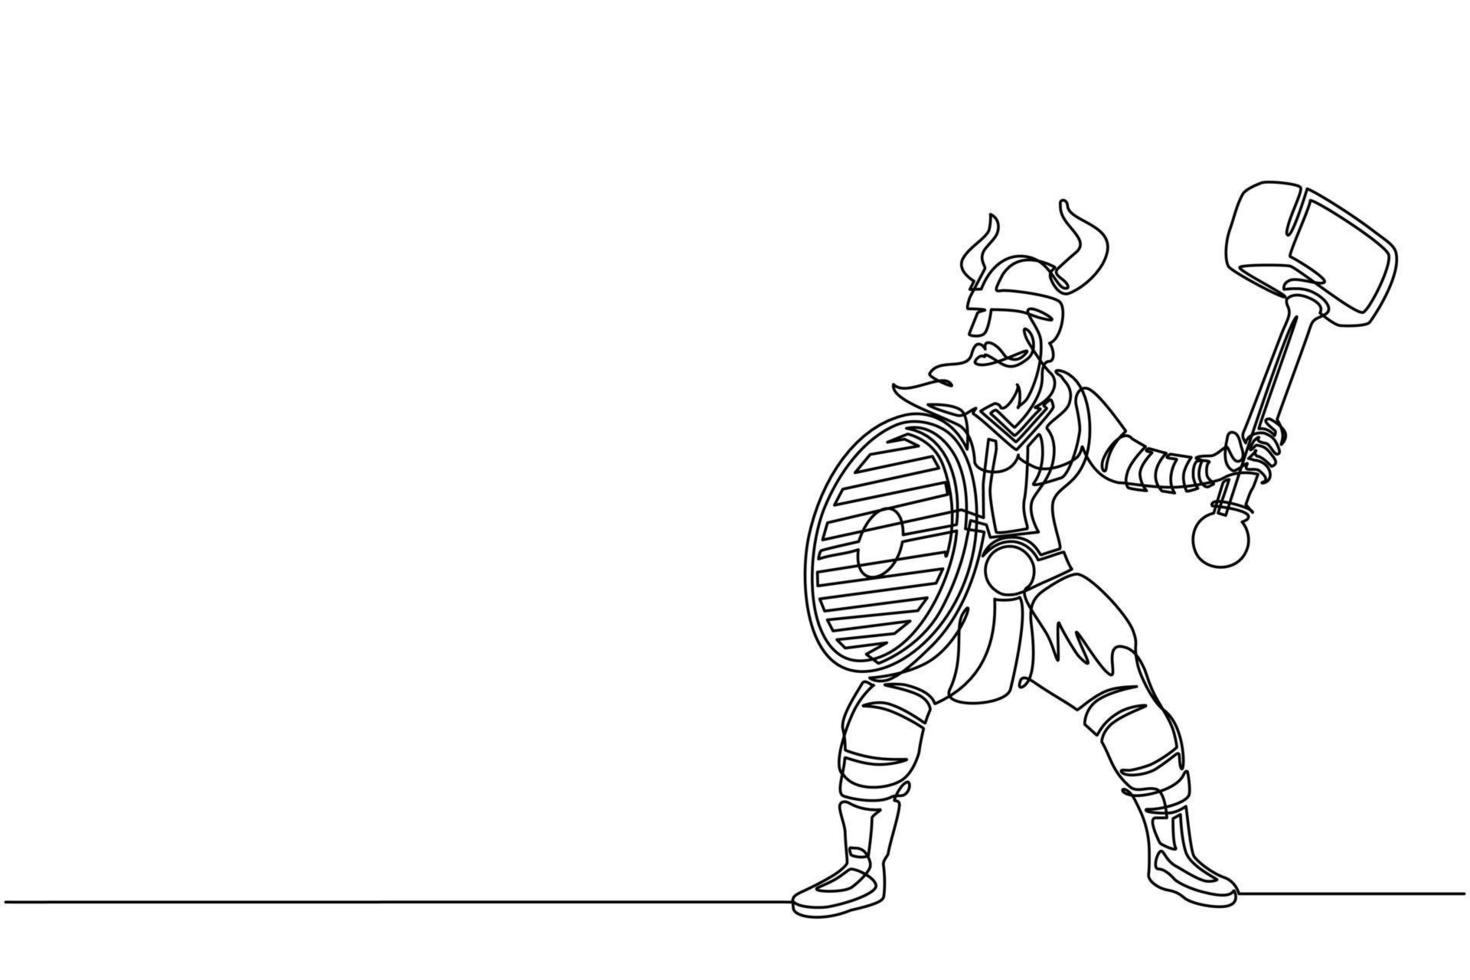 Continuous one line drawing big strong muscular orange warrior viking with hammer and shield furiously attack. Viking in horned helmet holding hammer and shield. Single line draw design vector graphic